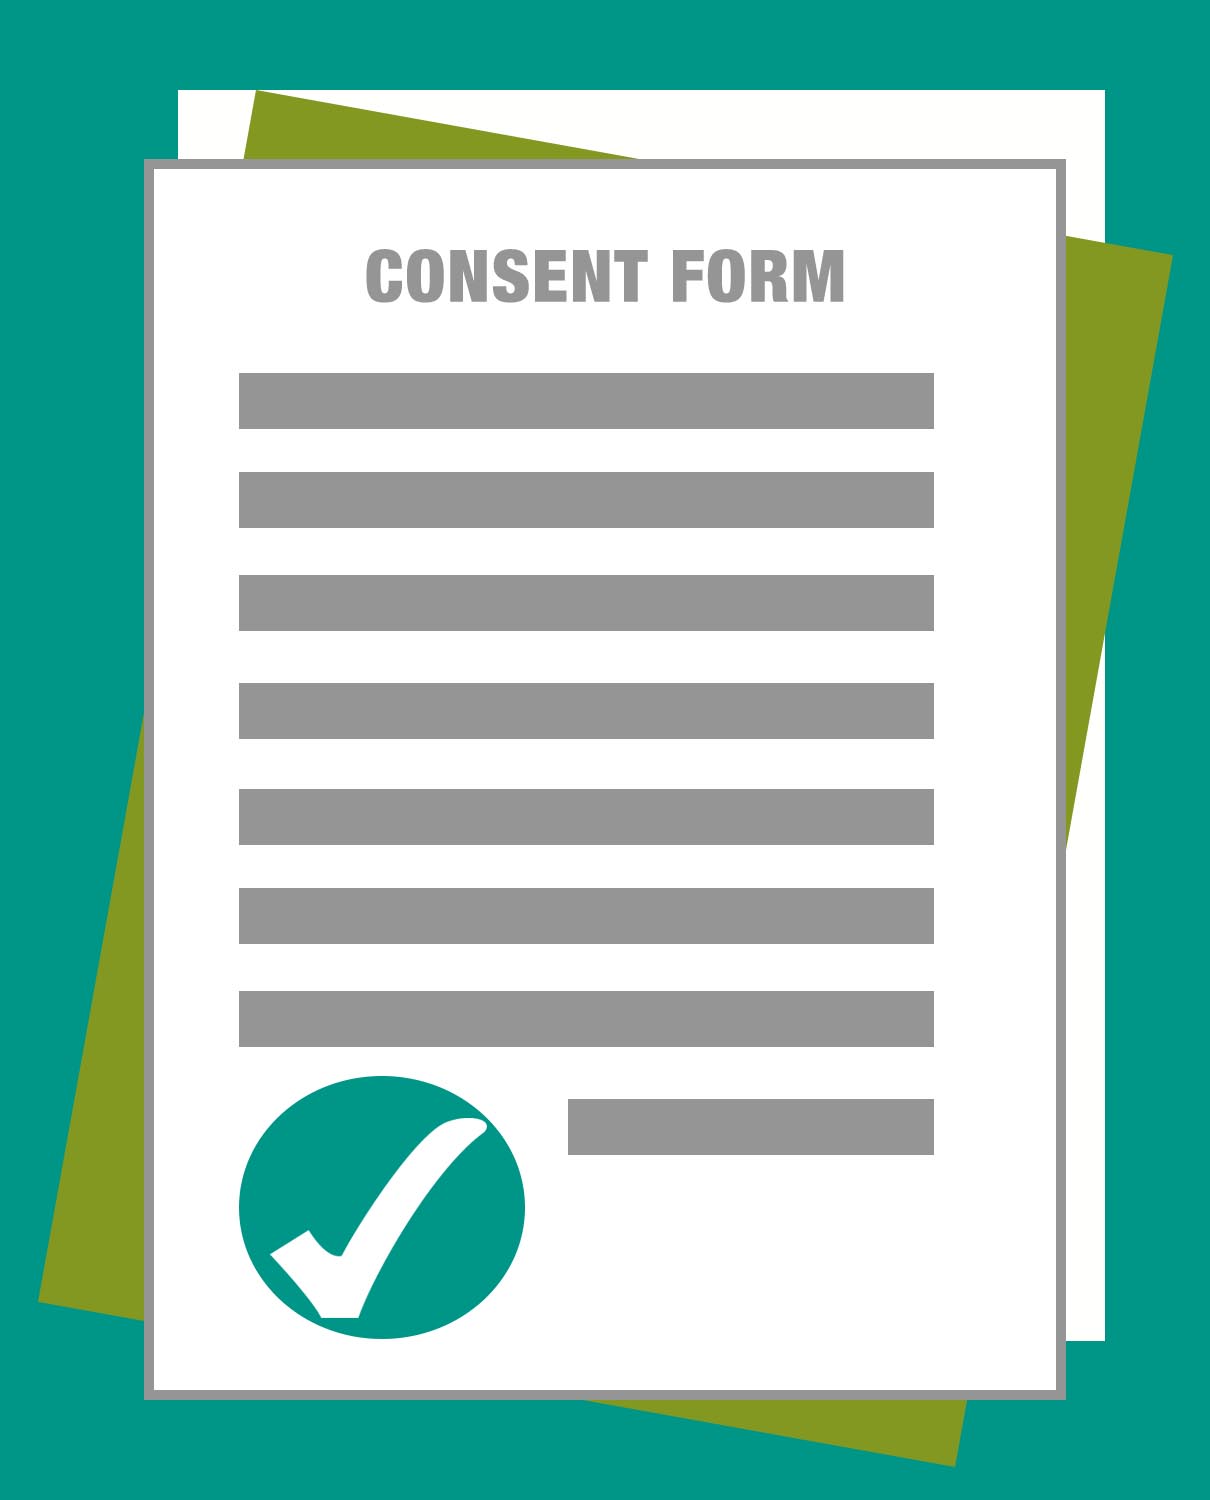 consent form graphic